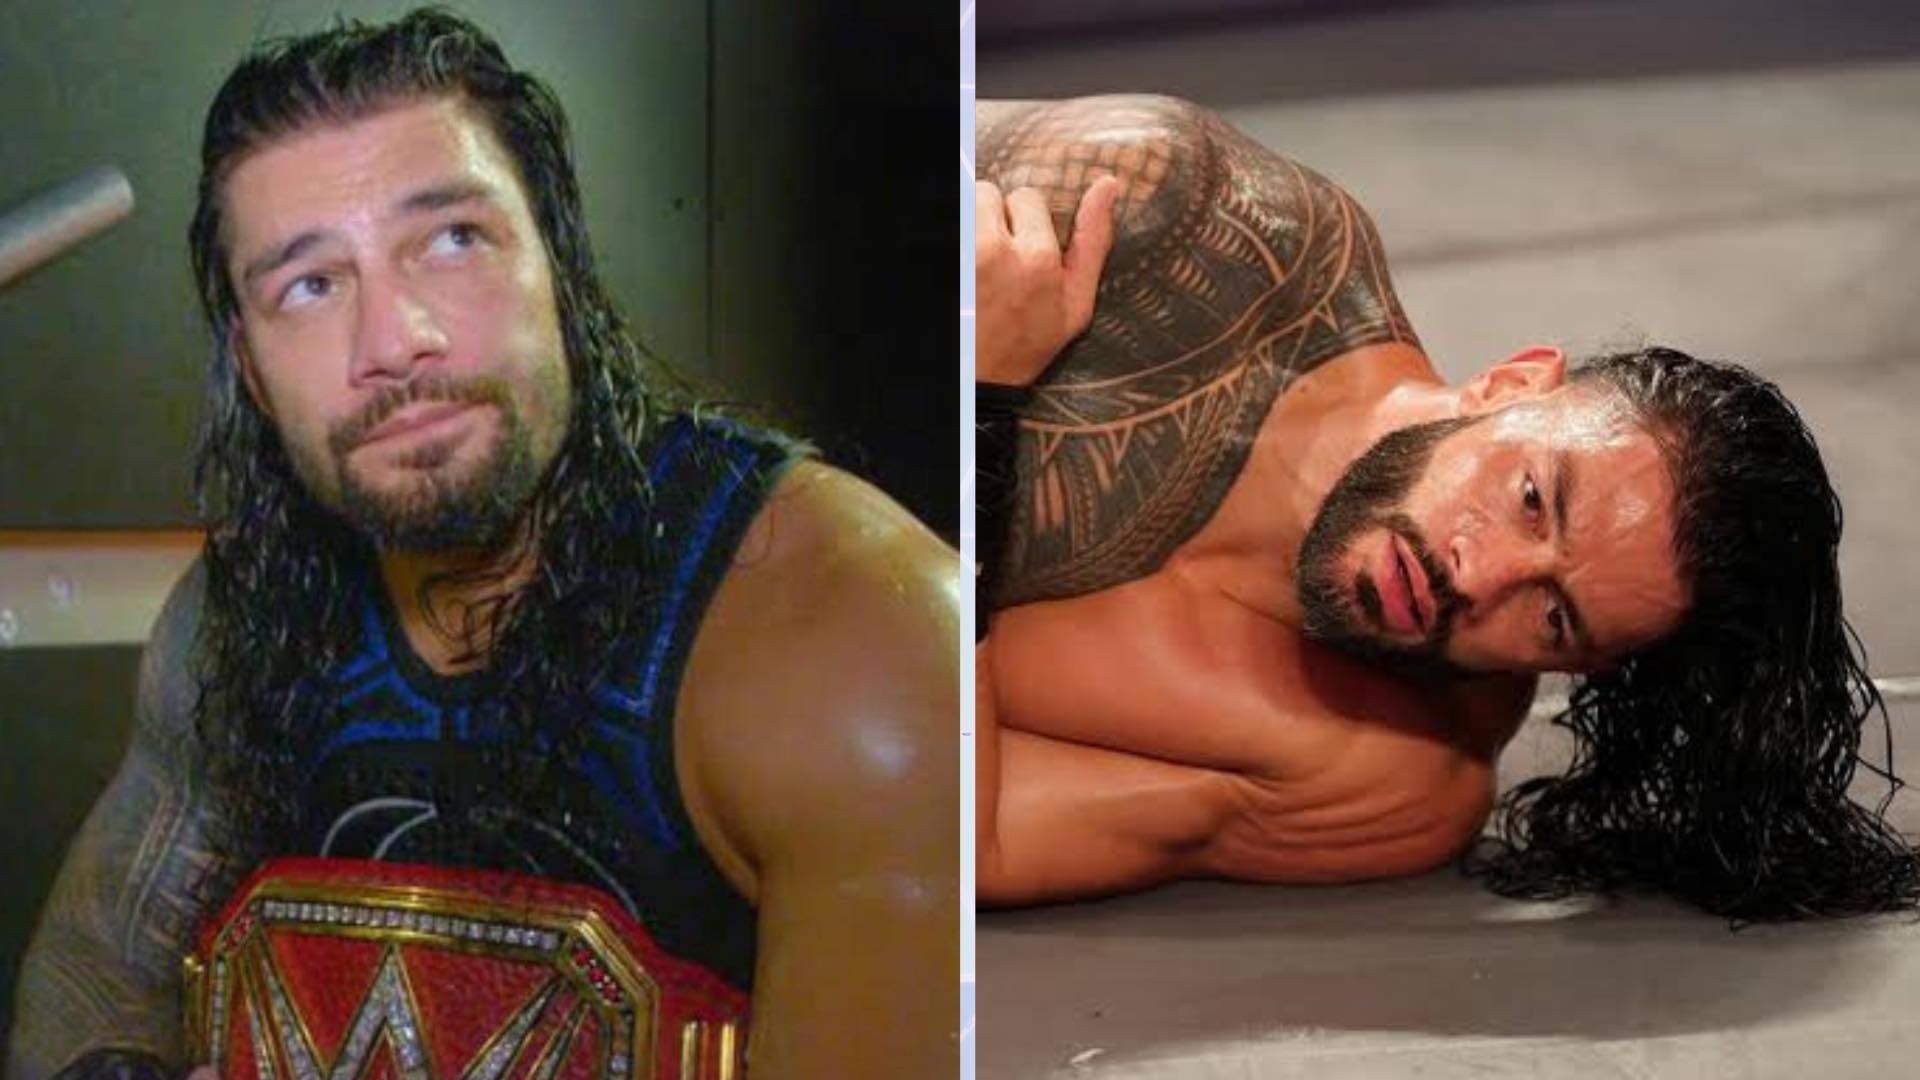 When will Roman Reigns be back in action in WWE?